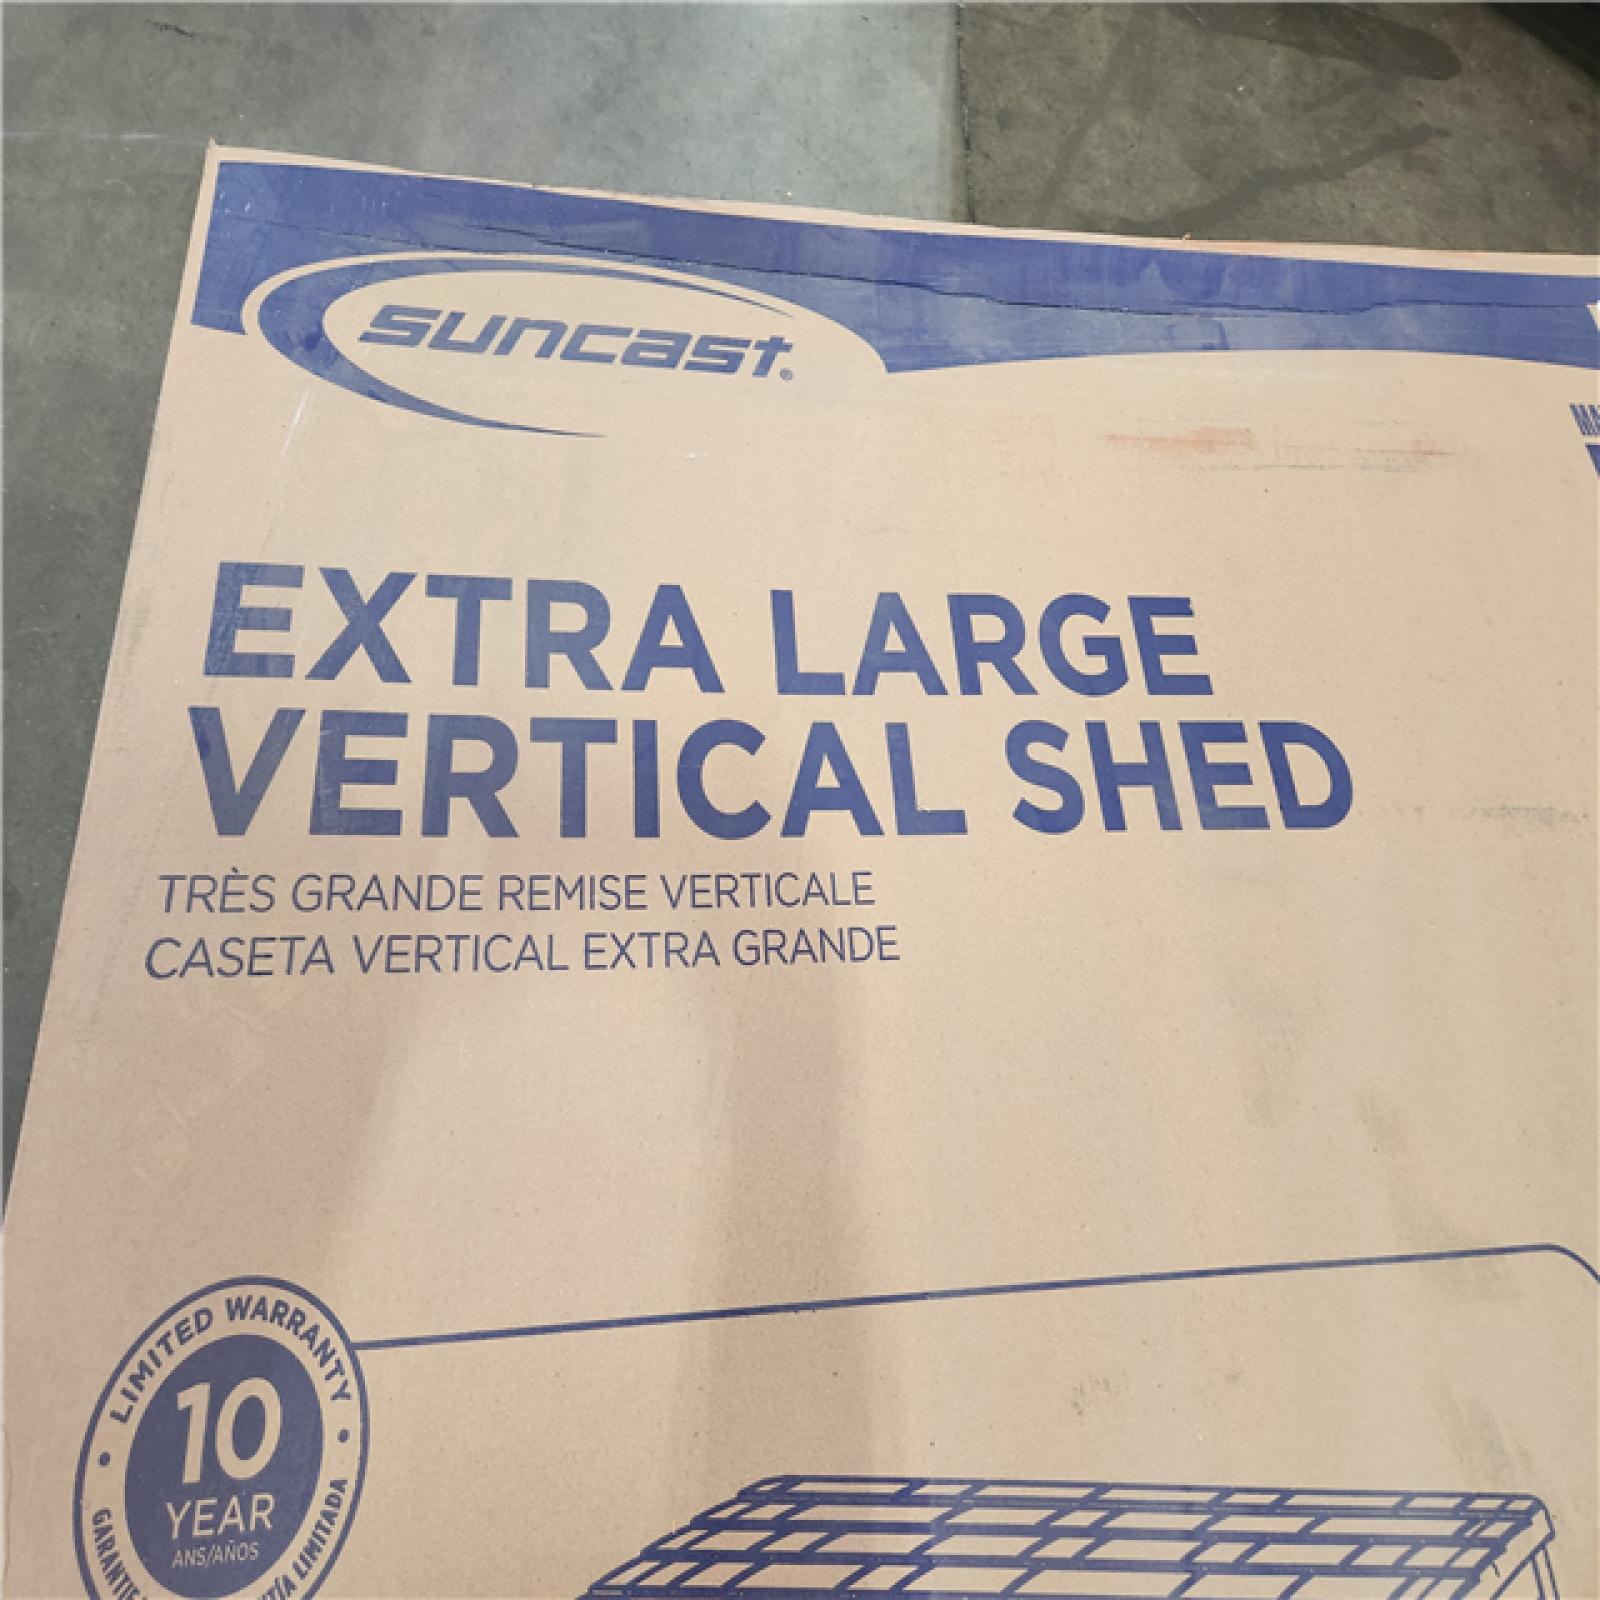 CaliforniaAS-IS SUNCAST EXTRA LARGE VERTICAL SHED